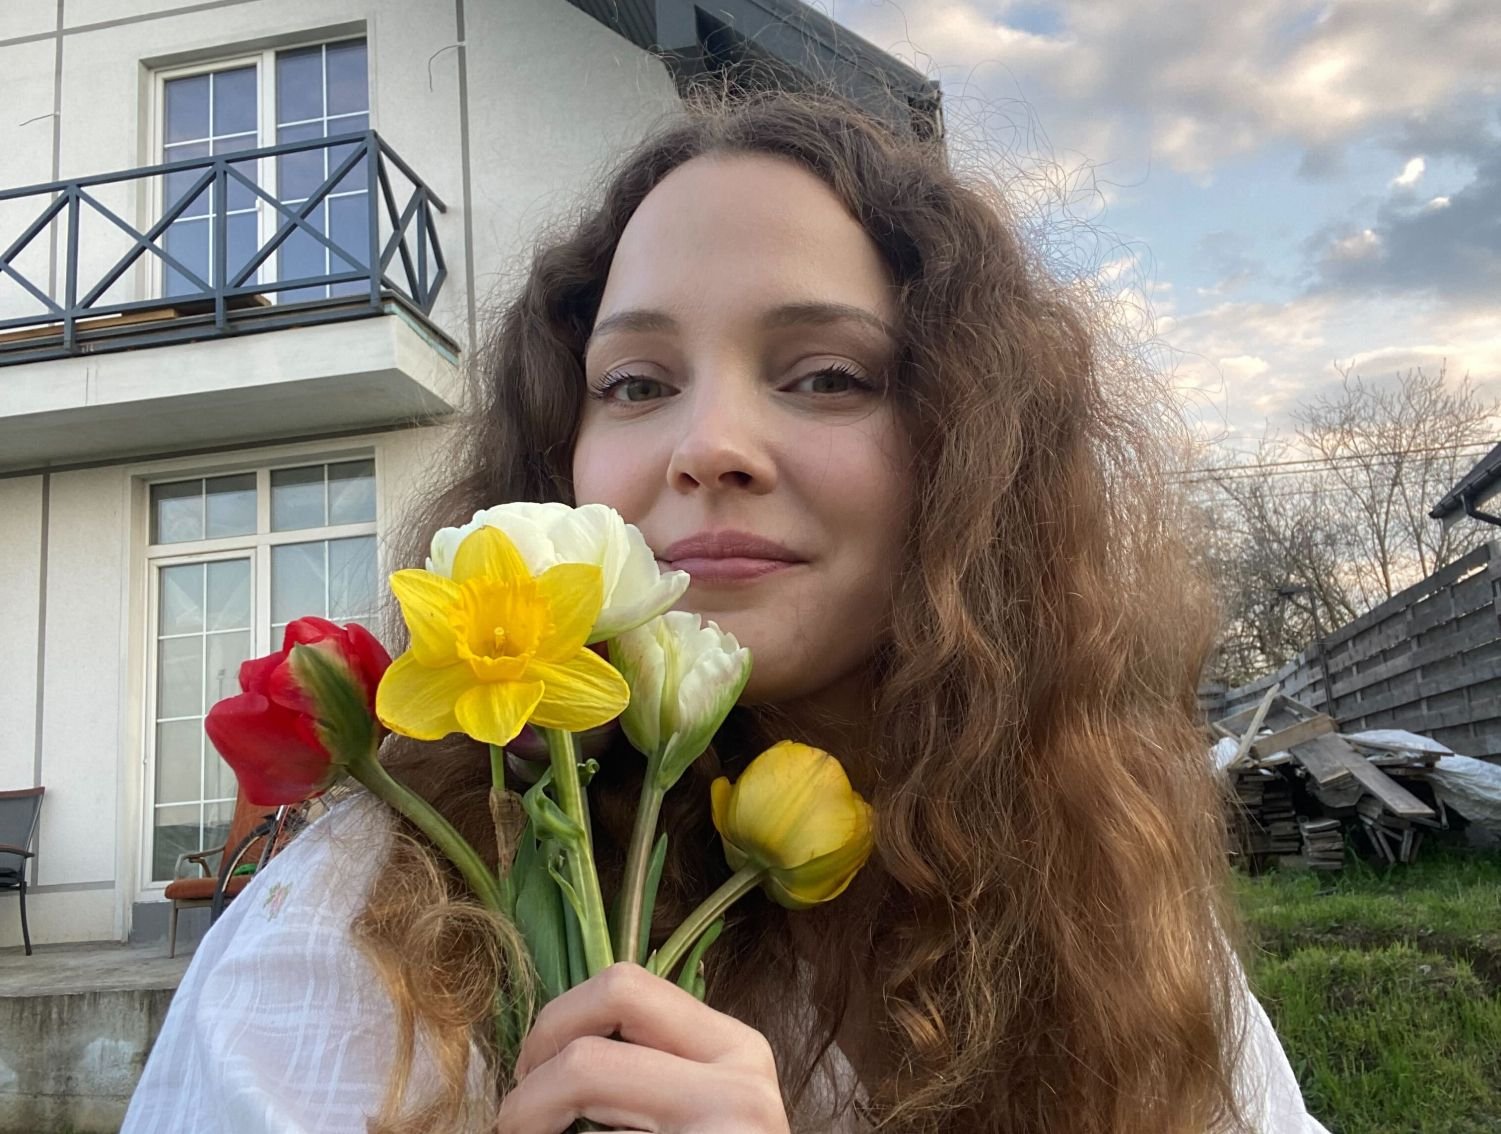 Daria at her home with flowers from her own garden.